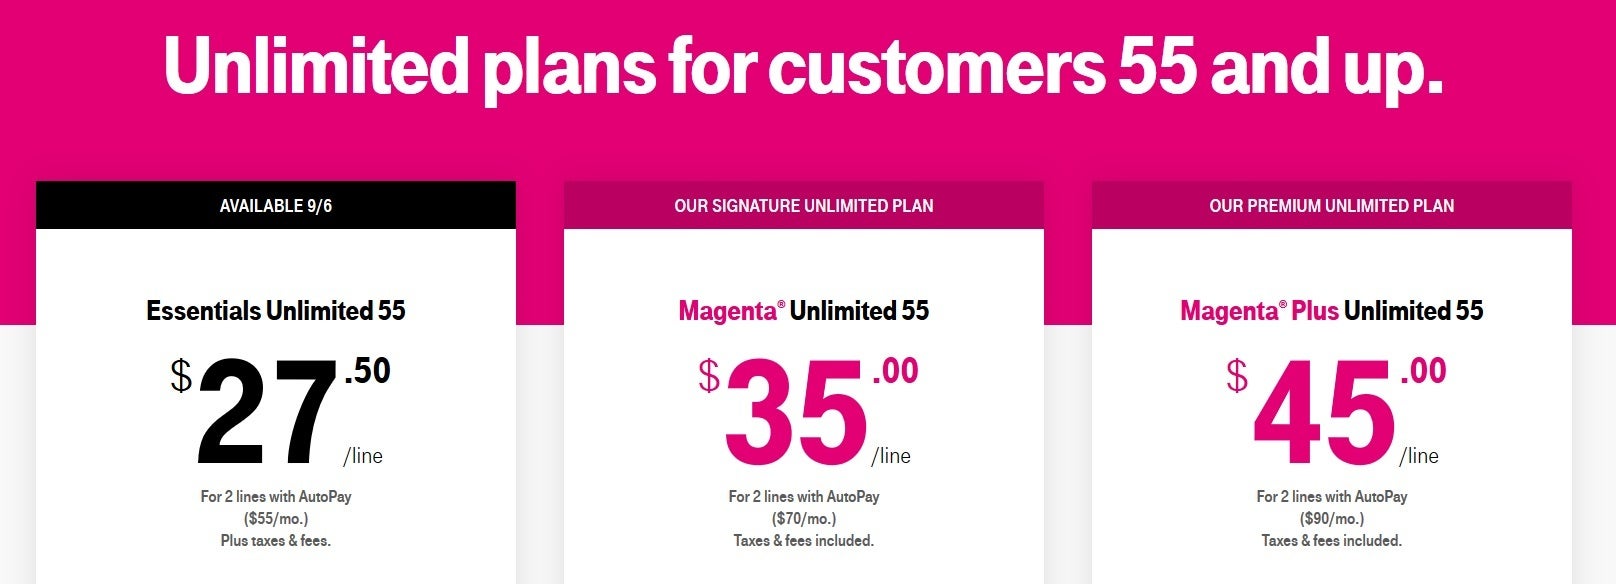 Starting tomorrow, T-Mobile will have three unlimited plans for those 55 and older - Boomers can get two unlimited lines for only $55/month from T-Mobile